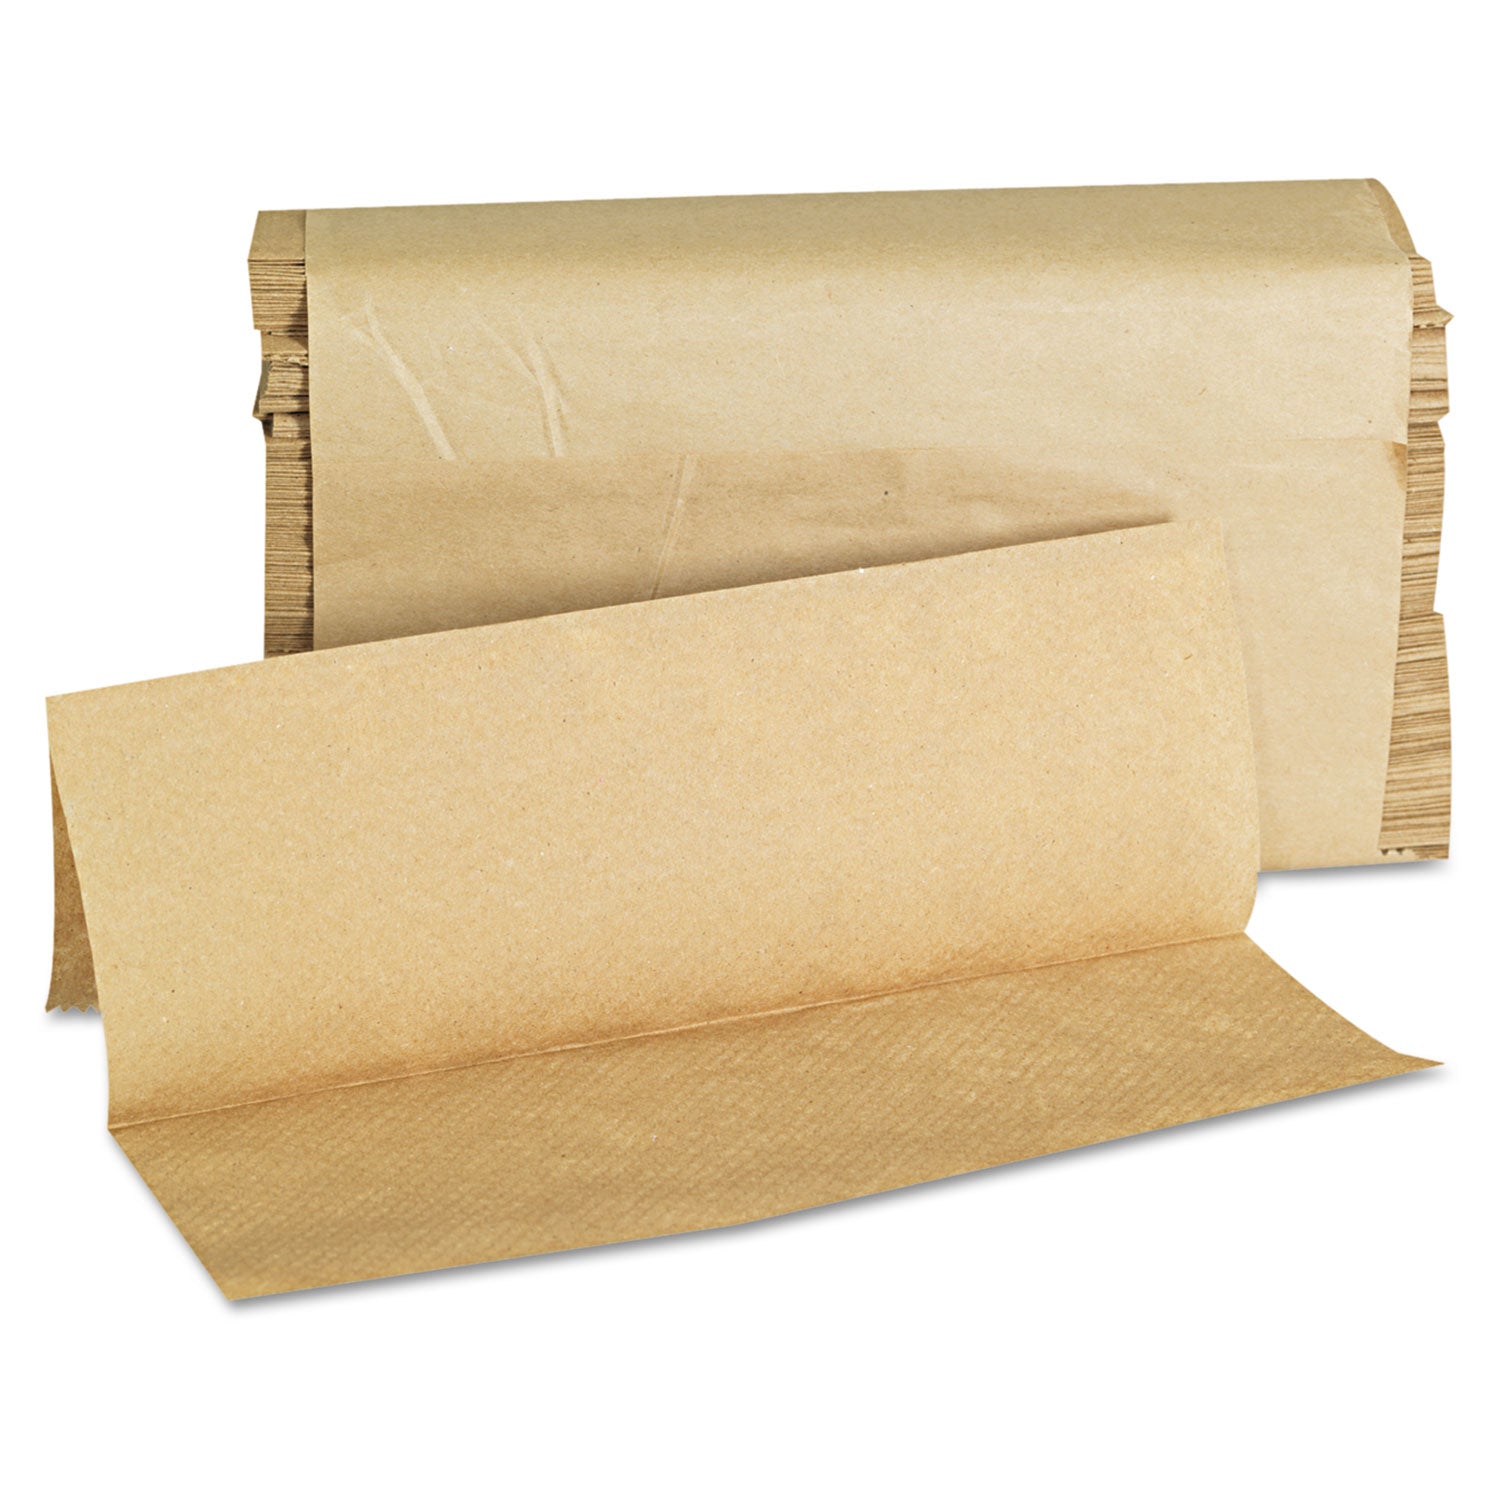 Folded Paper Towels, Multifold, 9 x 9.45, Natural, 250 Towels/Pack, 16 Packs/Carton - 